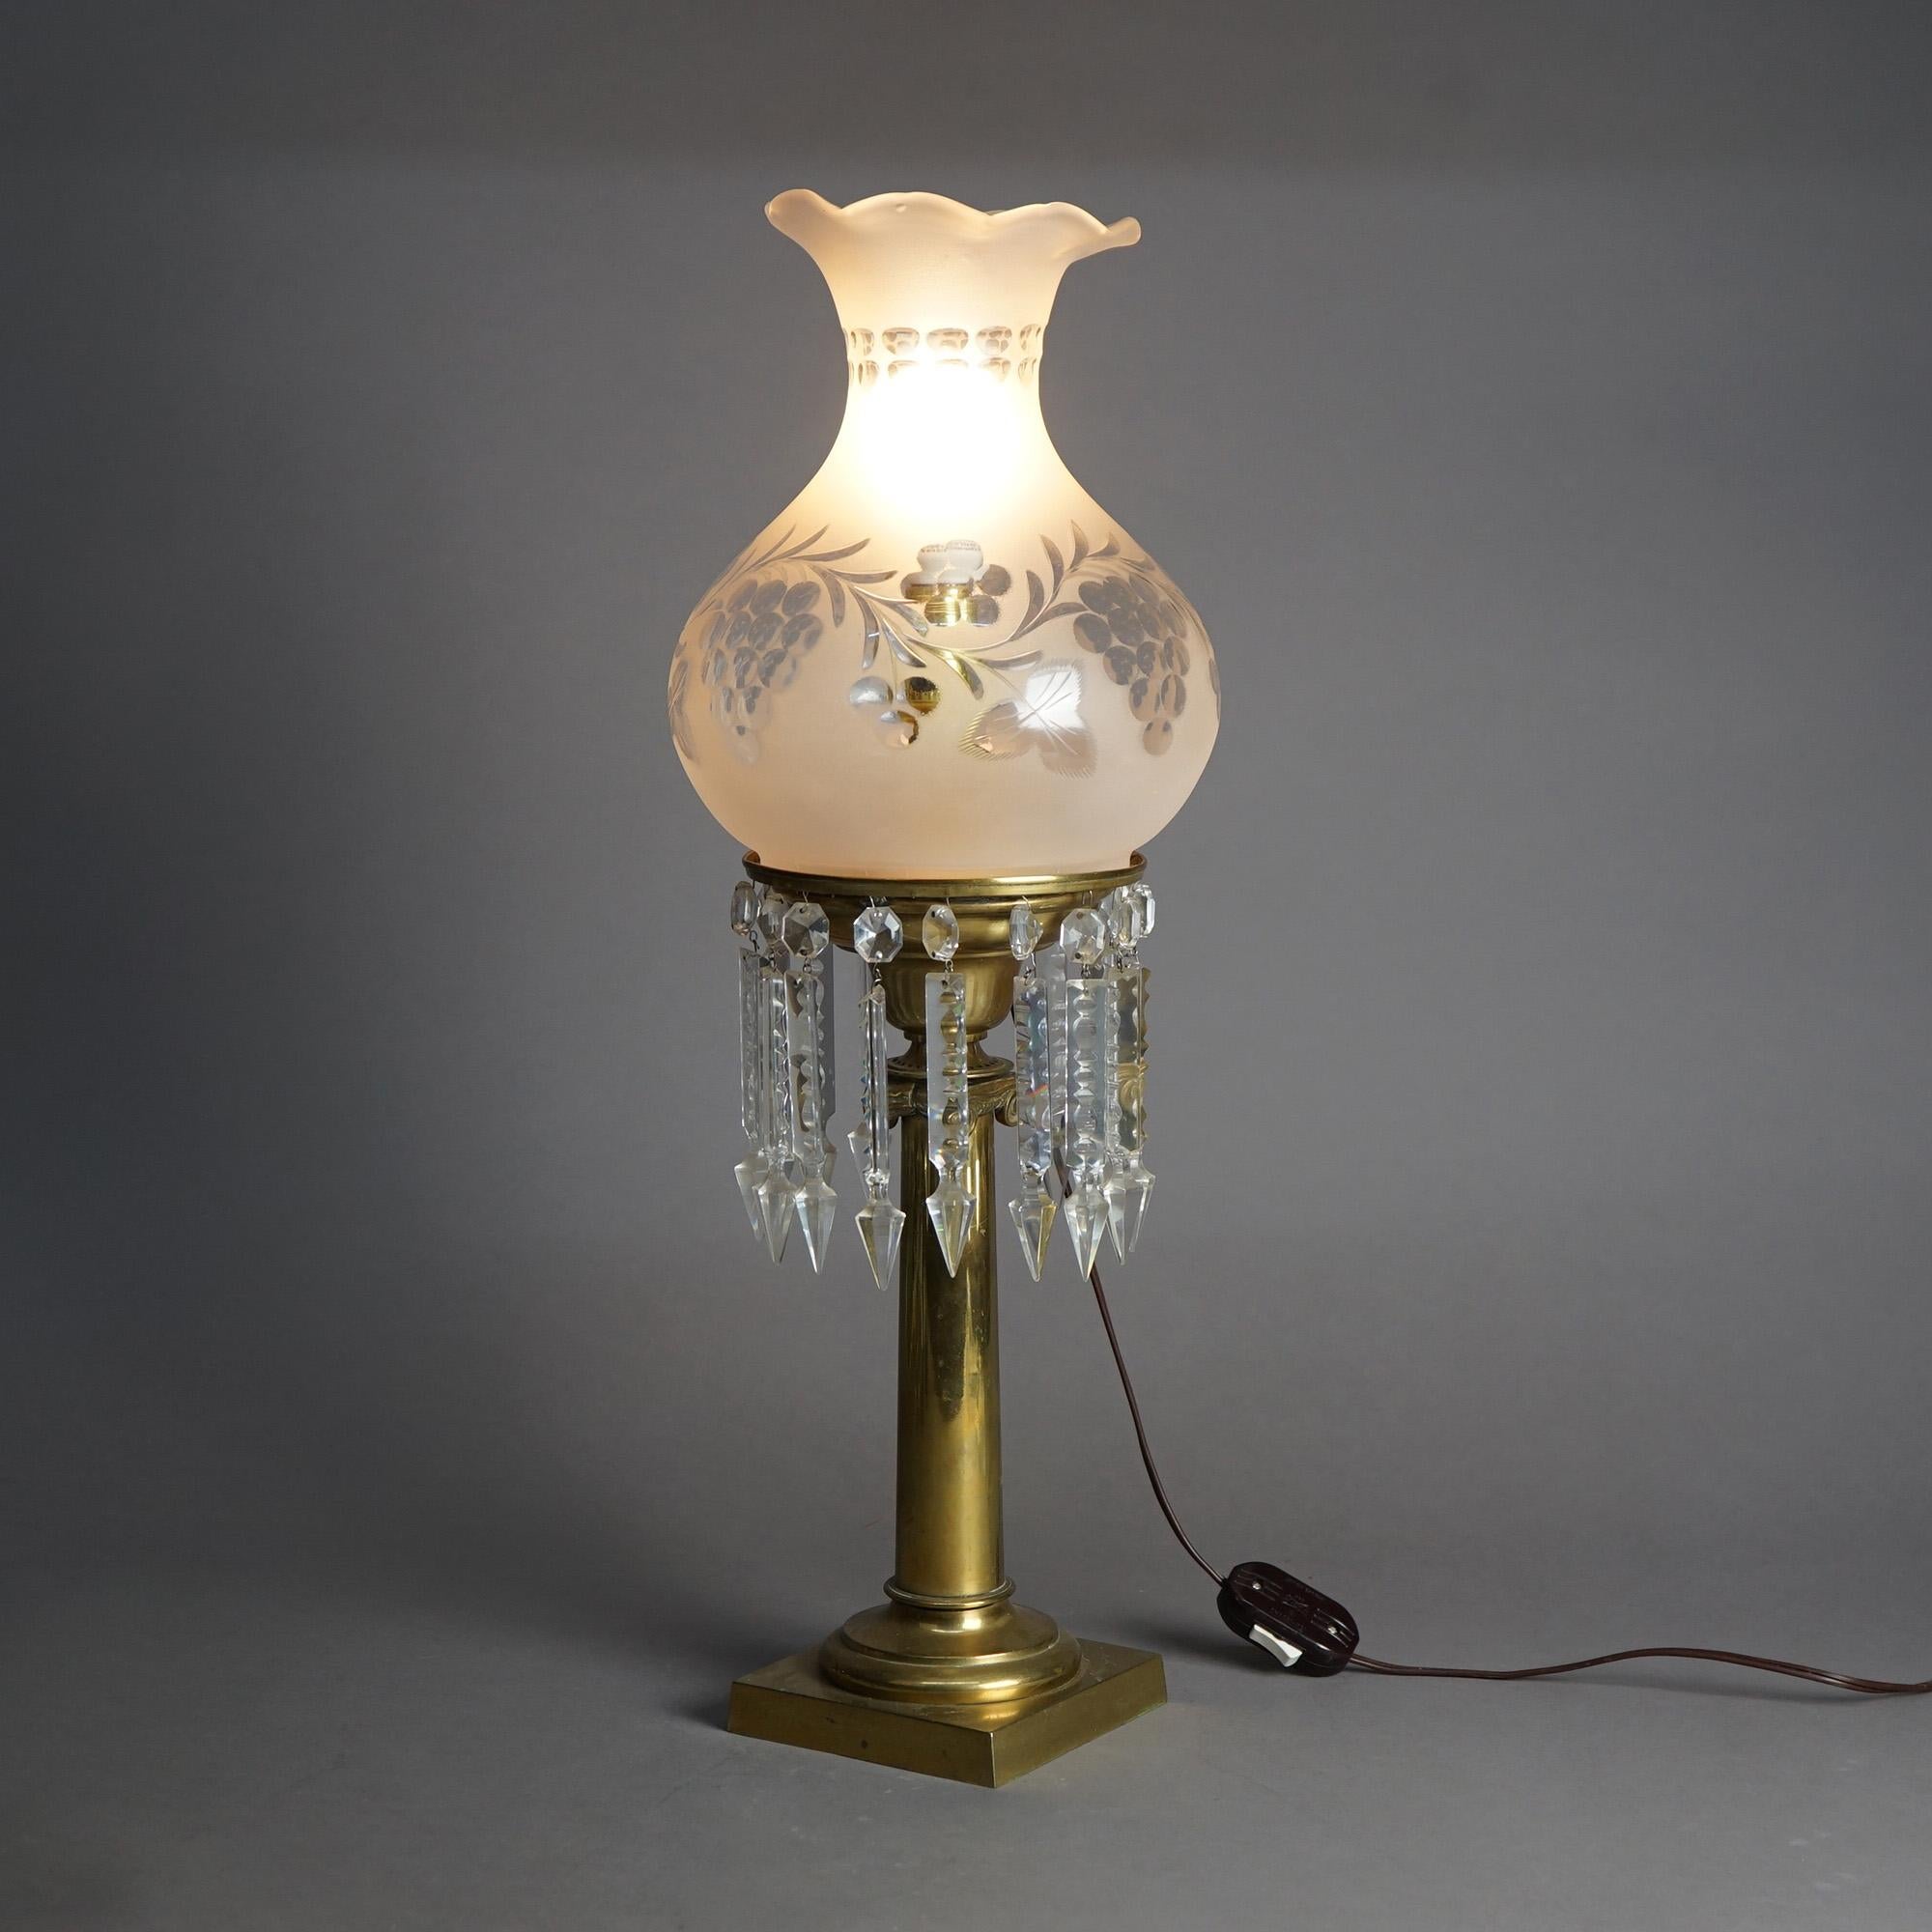 An antique solar lamp in the manner of Cornelius offers Classical form with cut back glass shade over brass base with hanging cut crystals, electrified, c1840

Measures- 25''H x 8.25''W x 8.25''D